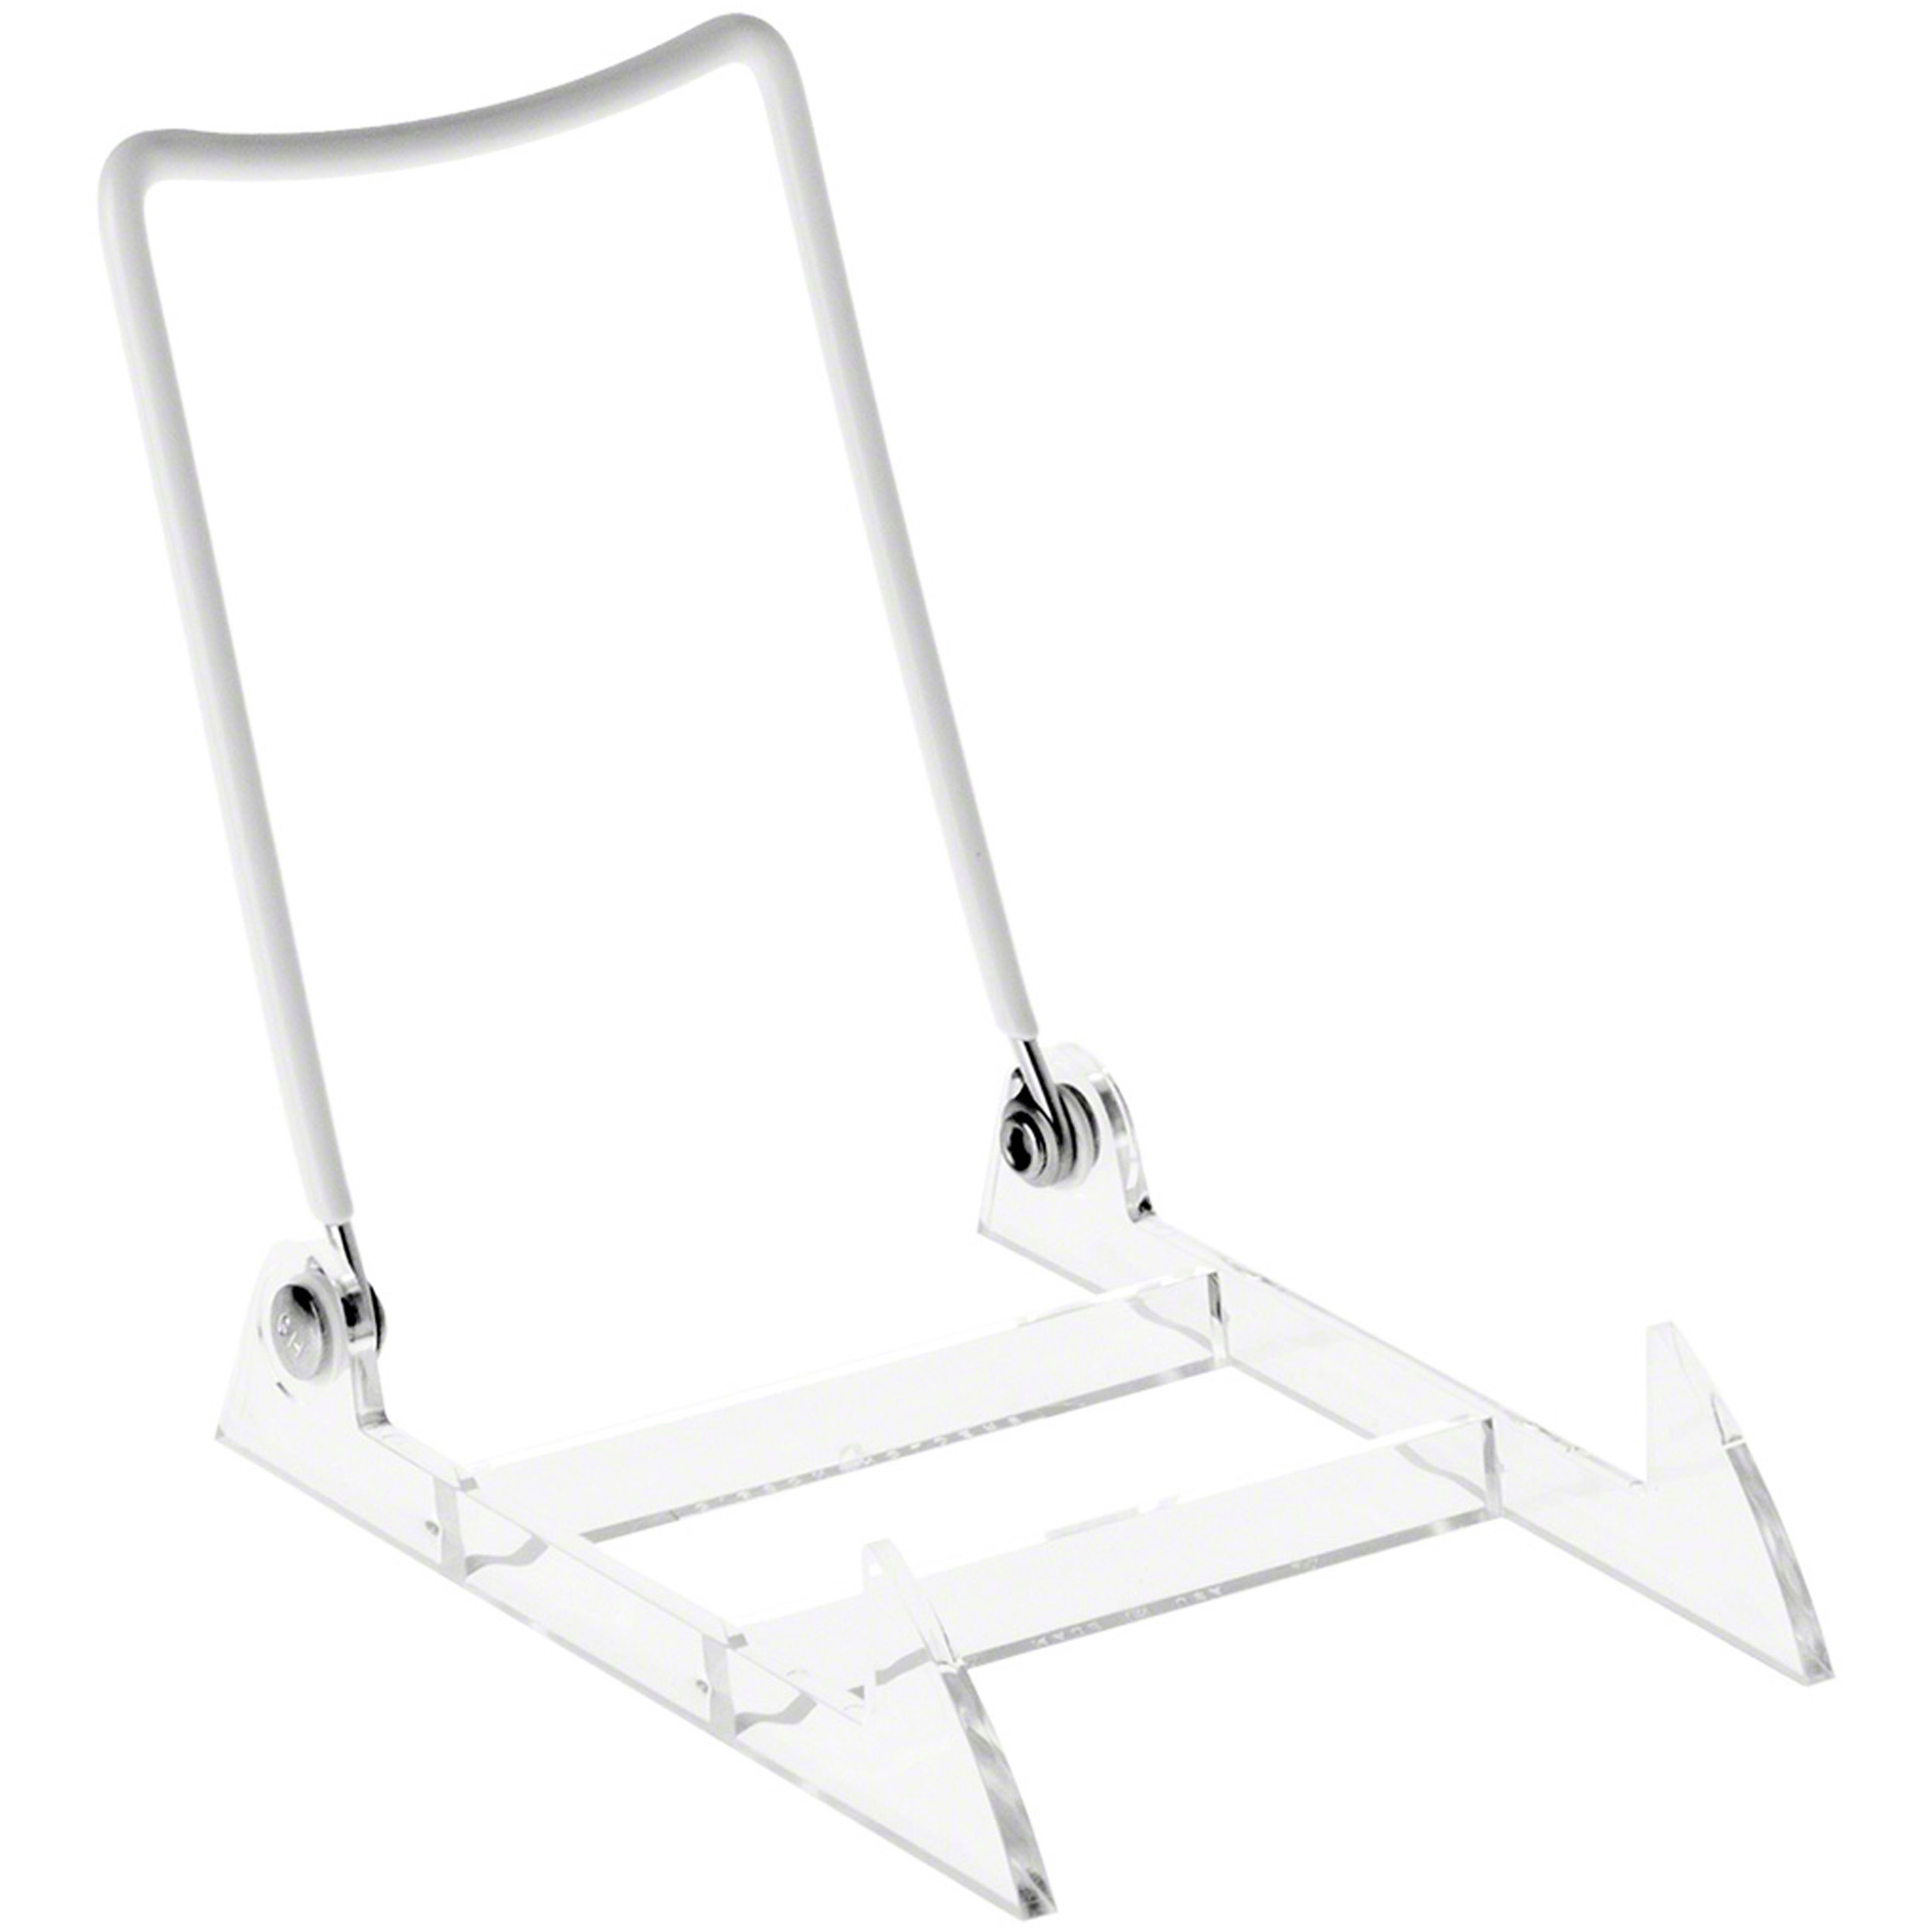 Gibson Holders 3PL Adjustable White Wire and Clear Acrylic Display Easel, 4" W x 5.5" D x 5.5" H, Pack of 2 - image 1 of 1